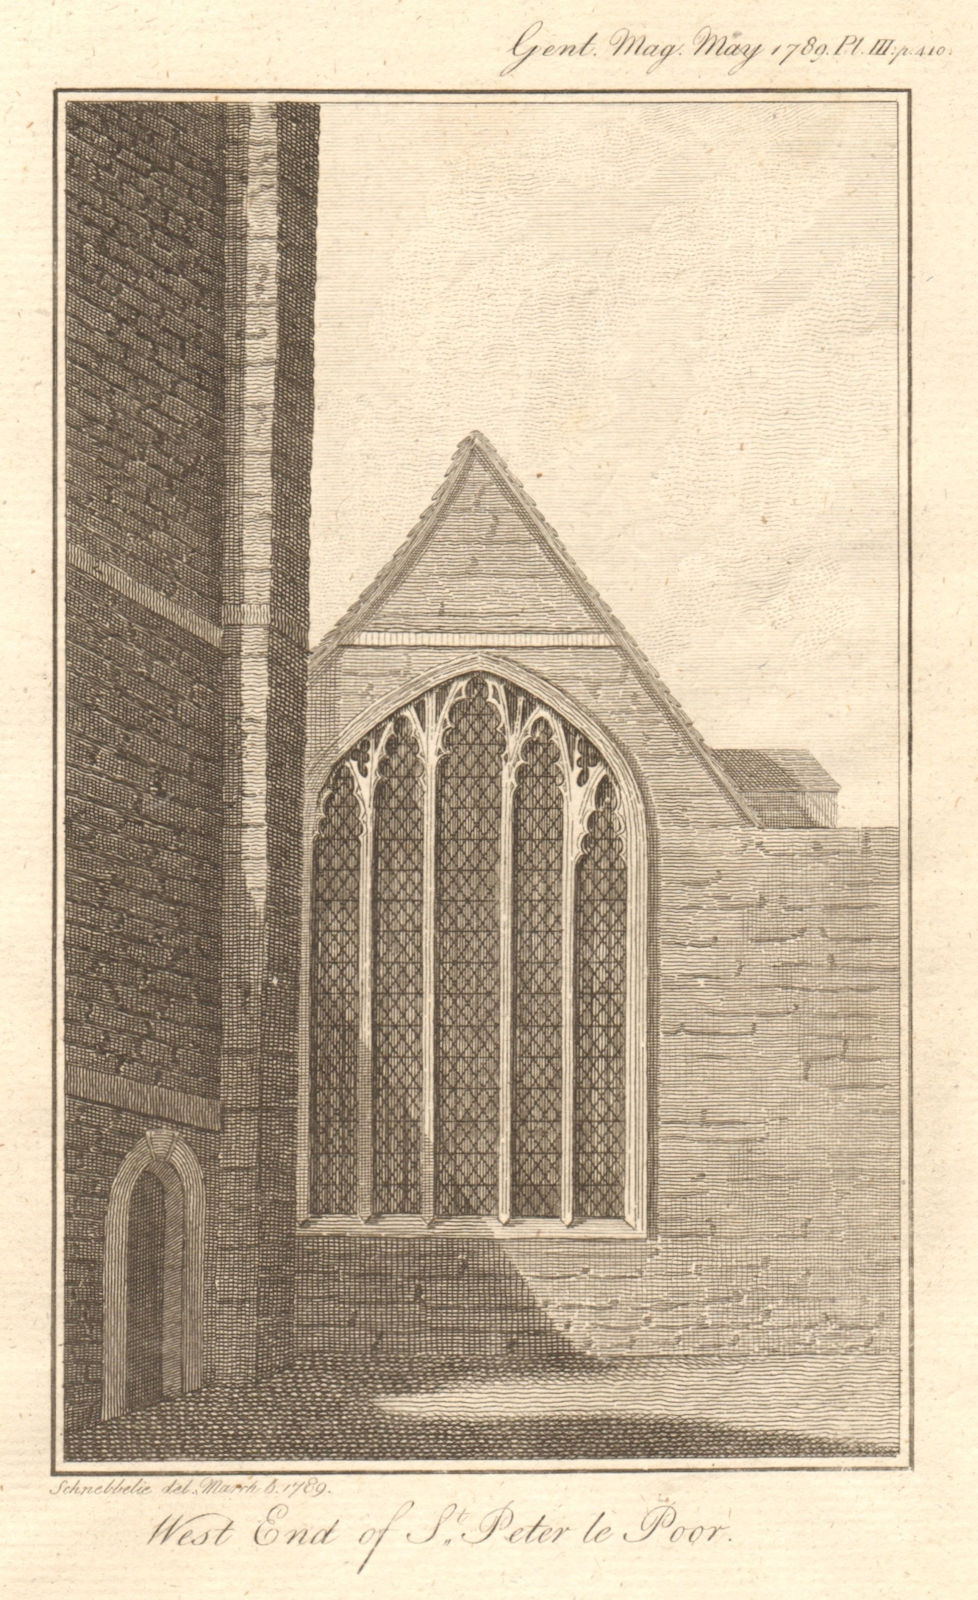 St. Peter le Poer church. Demolished 1907. Broad Street, City of London 1789